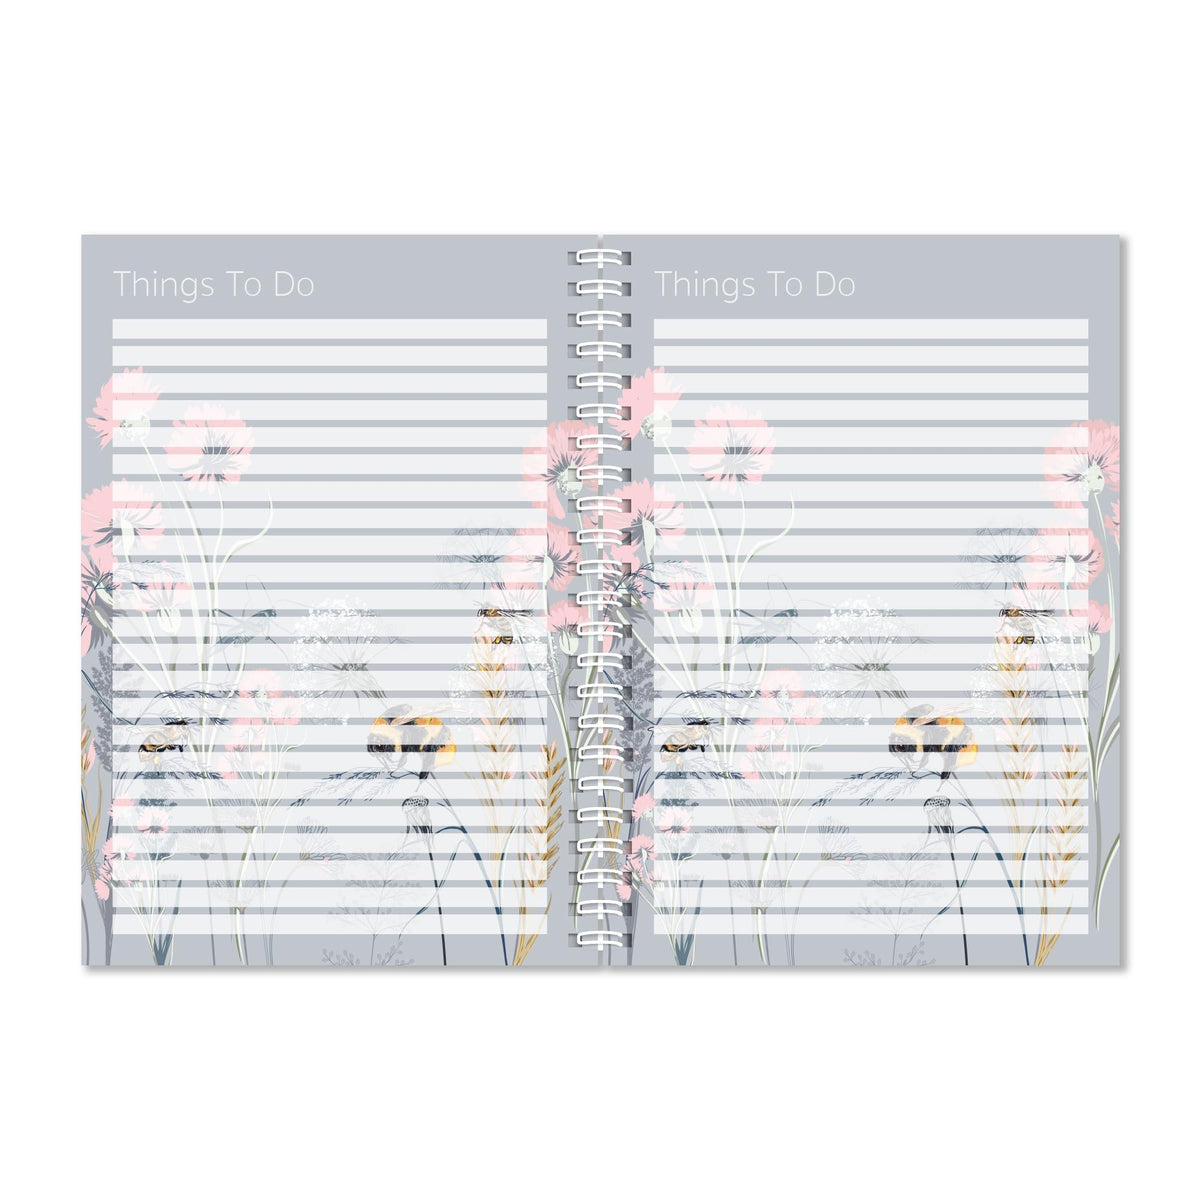 Exacompta - Ref GS015Z A5 Things To Do Notebook, 90gsm paper 149mm x 210mm, 40 Sheets of Lined Paper with a Flower & Bee Design, Great for Getting Organised